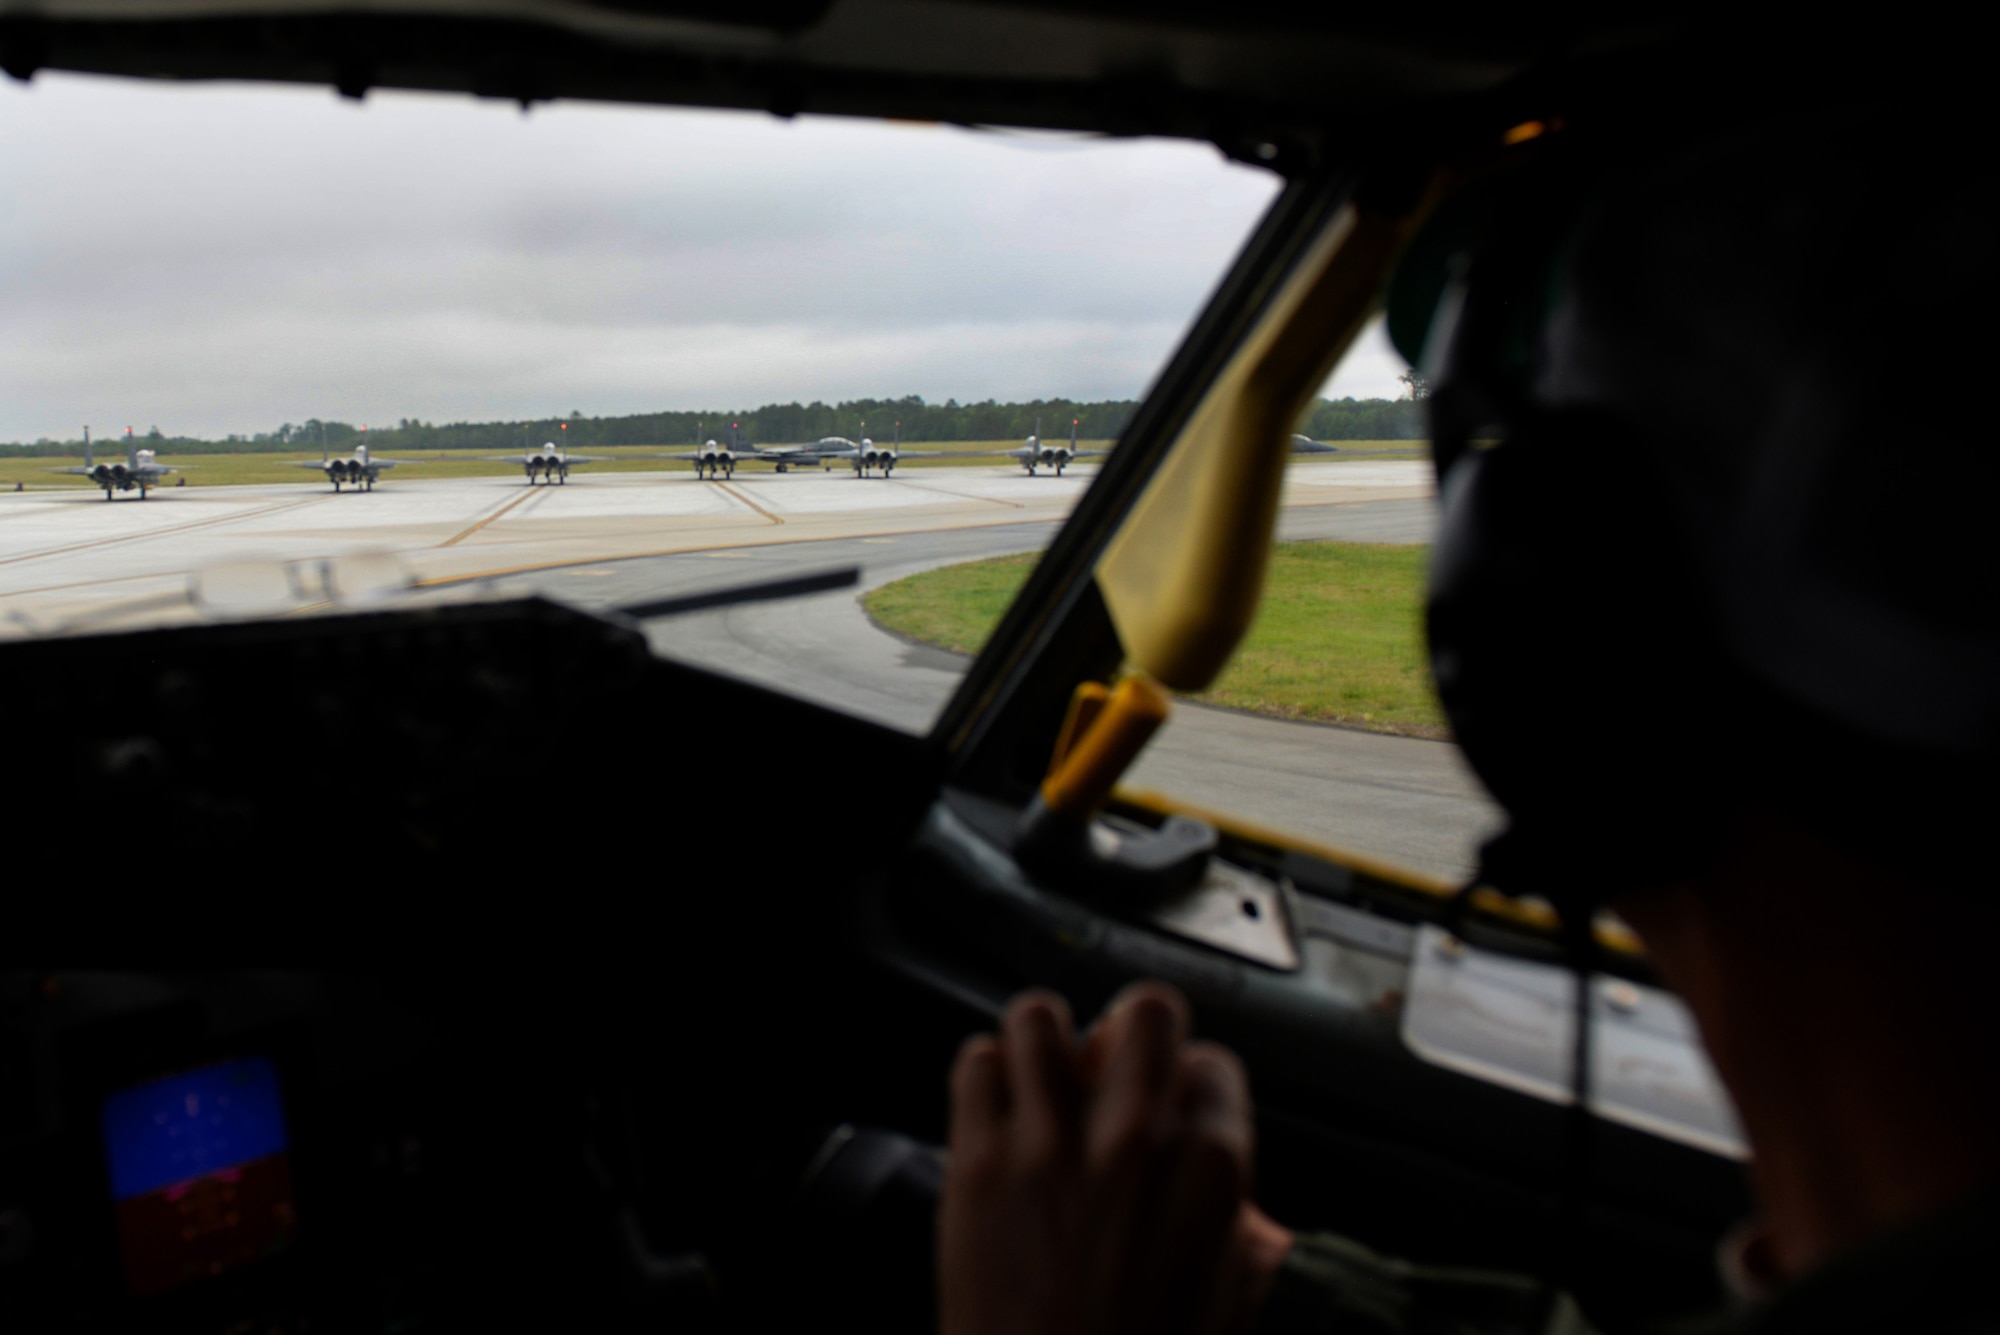 Lt. Col. Matt Young, 77th Air Refueling Squadron pilot, observes F-15E Strike Eagle aircraft preparing to take off, April 27, 2016, at Seymour Johnson Air Force Base, North Carolina. Young and Capt. Grant Fountain, also a 77th Air Refueling Squadron pilot, flew a KC-135R Stratotanker which accompanied the F-15Es halfway to Hill Air Force Base, Utah to participate in exercise Combat Hammer. (U.S. Air Force photo by Senior Airman Patrick Cole/Released) 